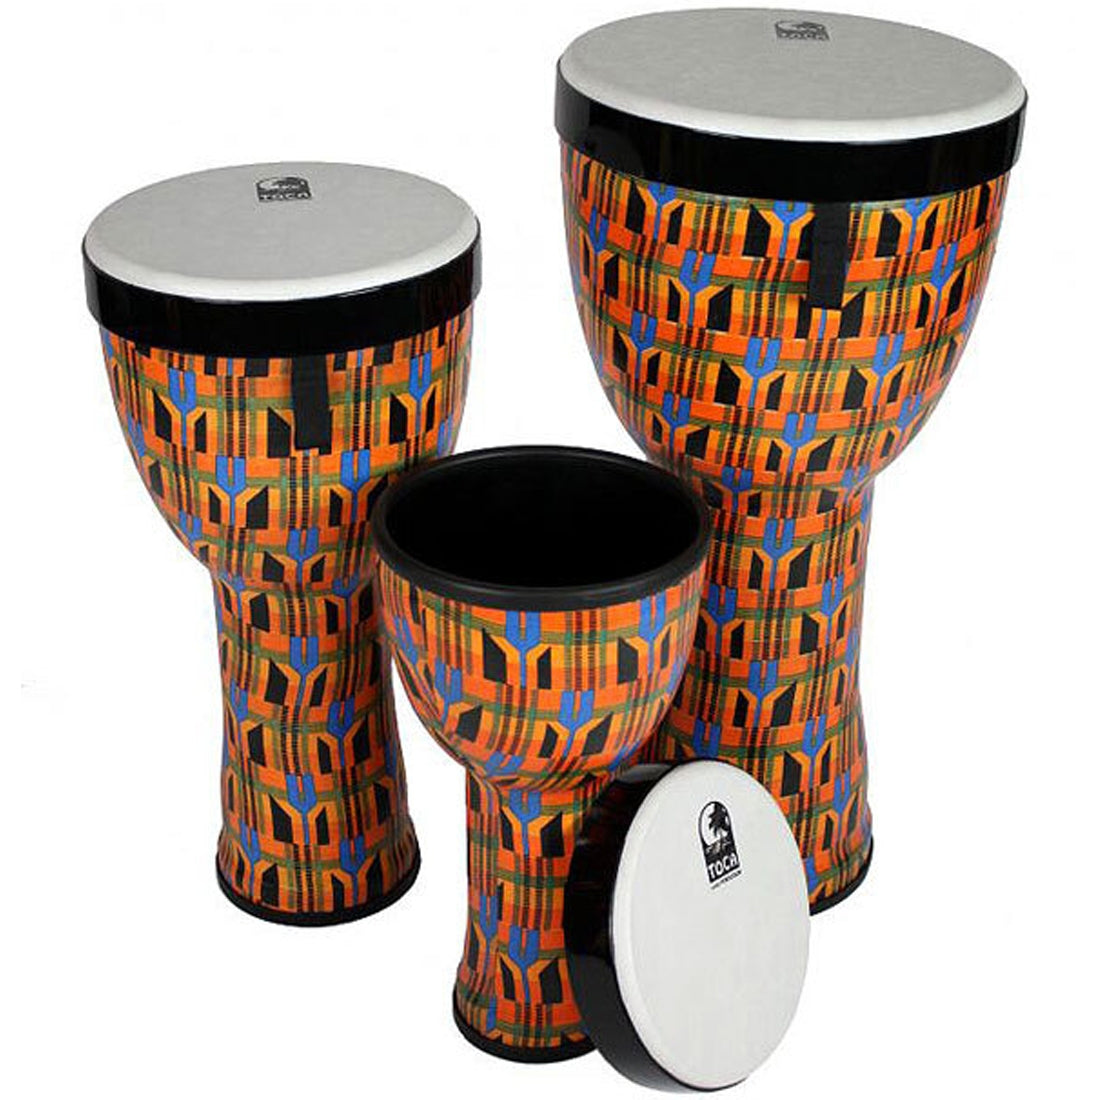 Toca Freestyle 2 Series Nesting Djembe 3-Pieces (8, 10, 12inch) Kente Cloth - TF2ND3PCK